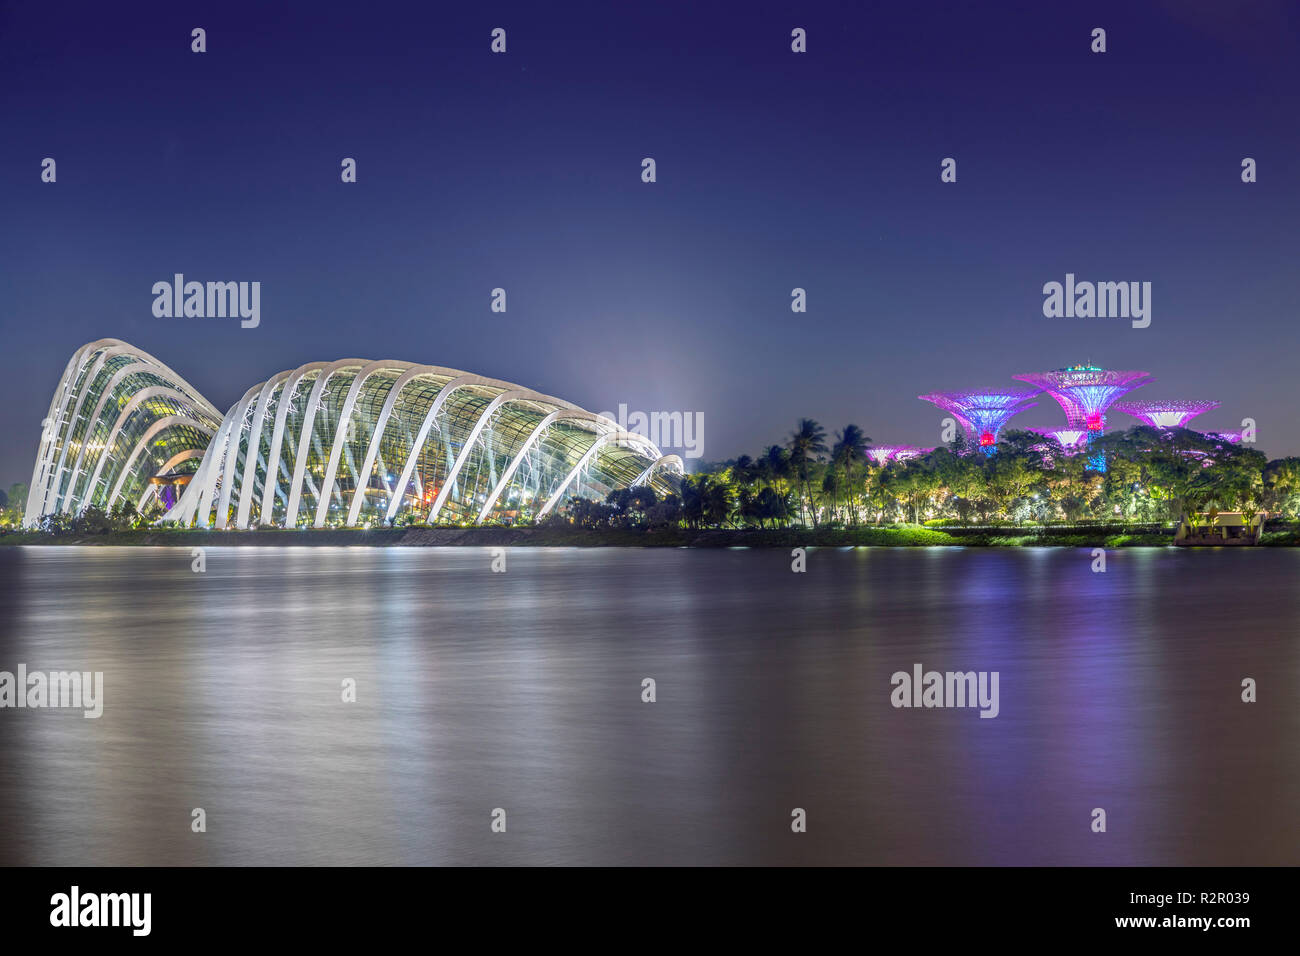 Singapore, Gardens by the Bay, OCBC ATM - Gardens (The Canopy) and illuminated Supertrees, night view Stock Photo